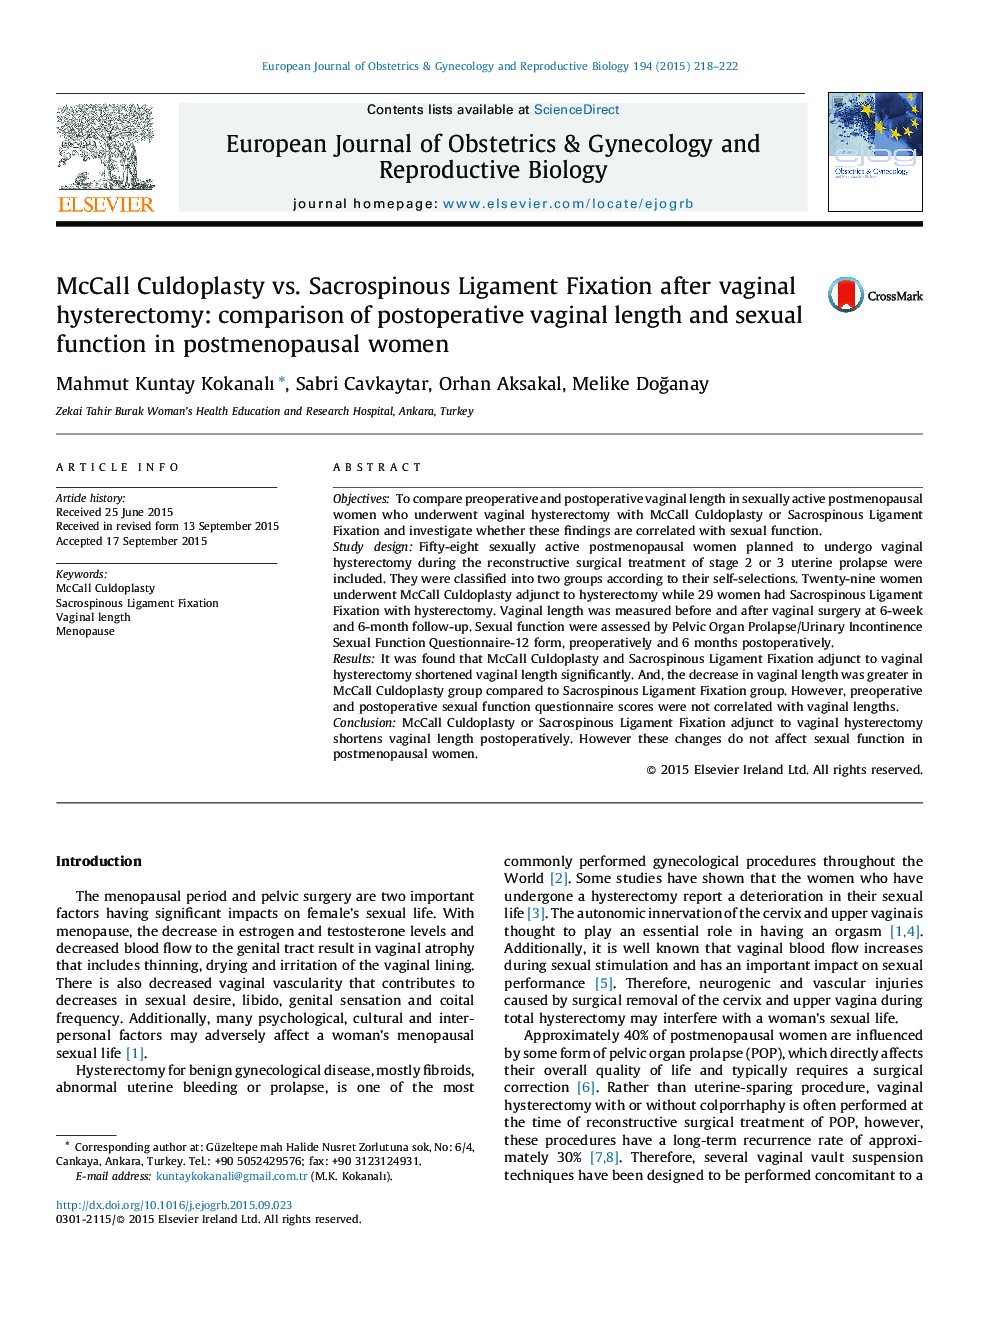 McCall Culdoplasty vs. Sacrospinous Ligament Fixation after vaginal hysterectomy: comparison of postoperative vaginal length and sexual function in postmenopausal women